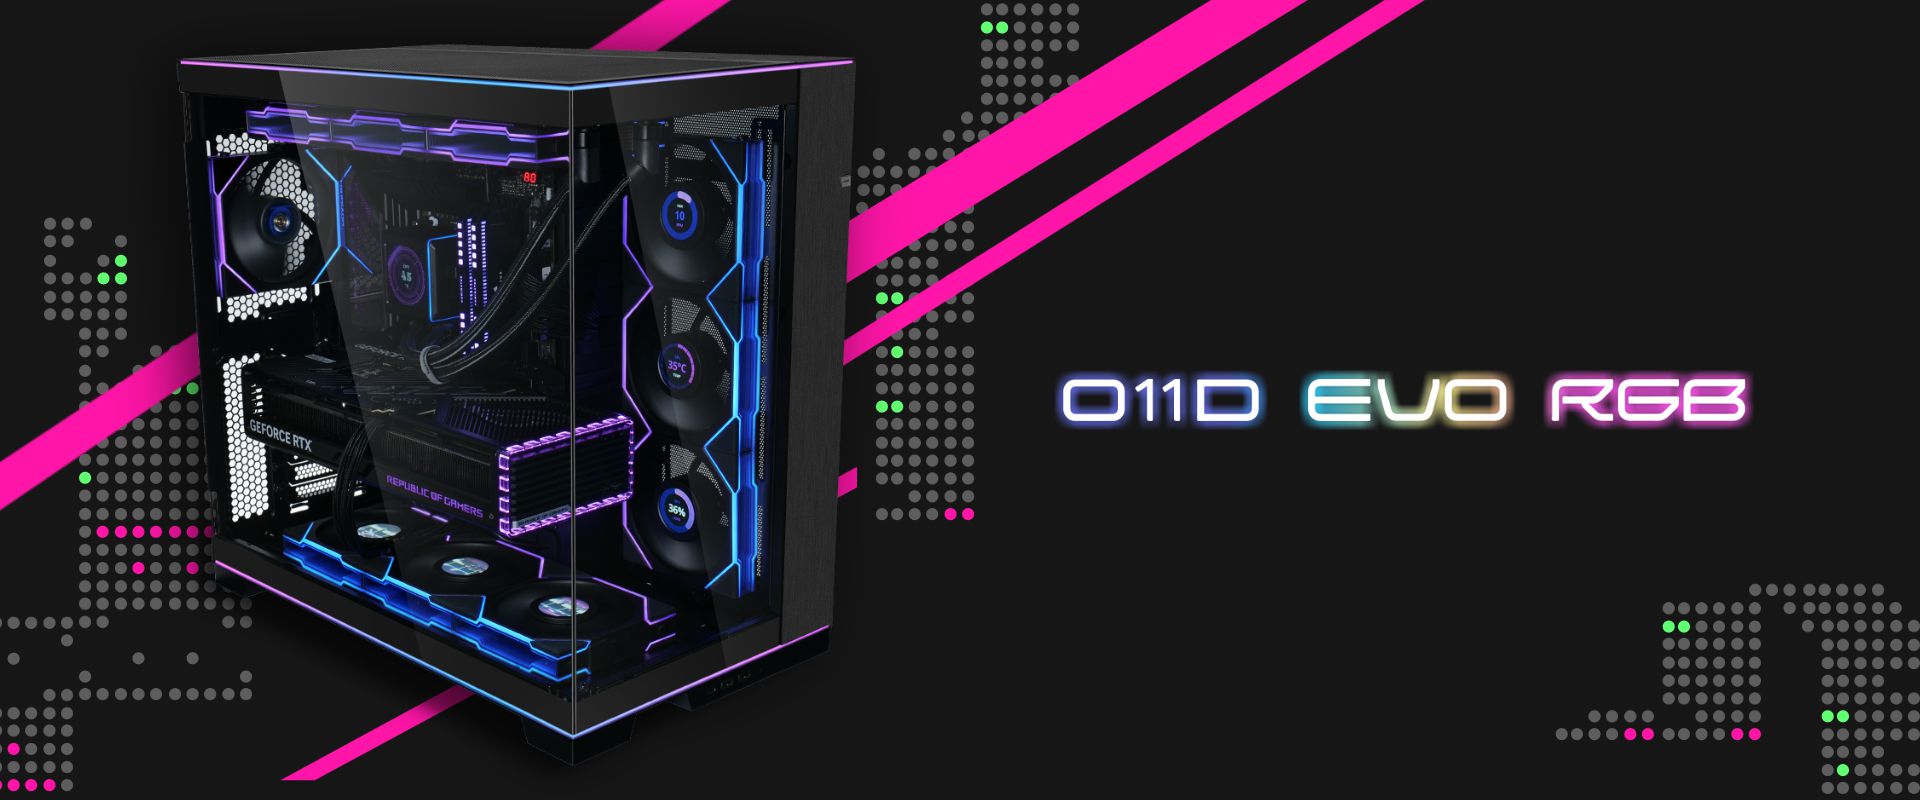 LIAN LI is a Leading Provider of PC Cases  Computer Cases – Computer Case  for PC Builders and Gamers. Water Cooling, RGB Fans, PC Desk Cases, Gaming  Cases, PC Build.